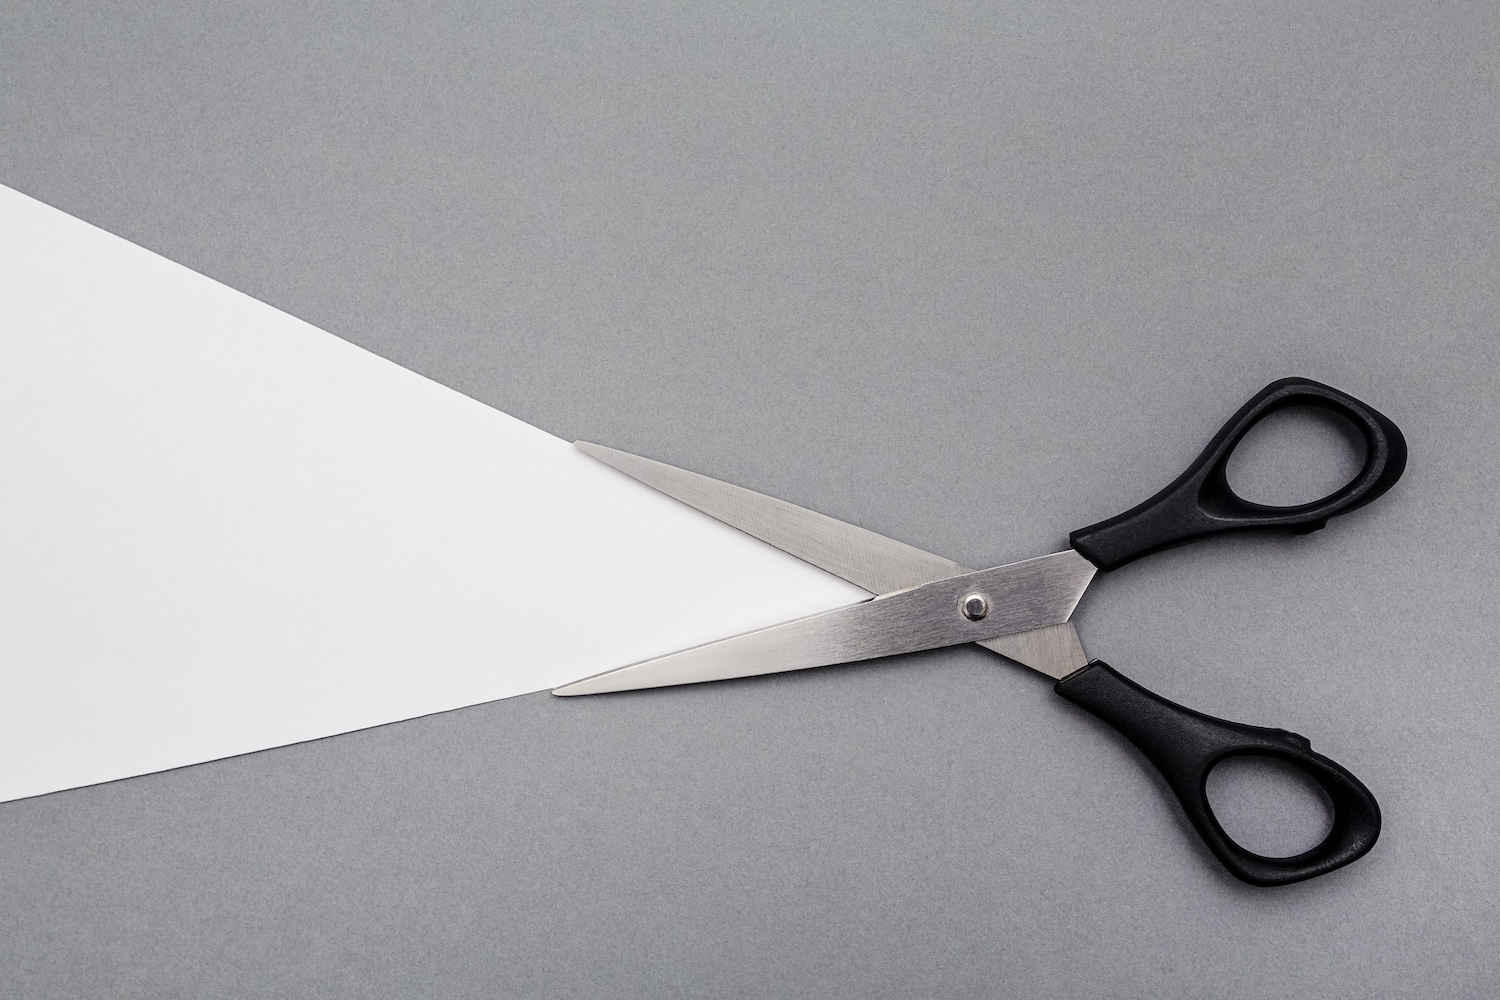 black-handled scissors against a gray background